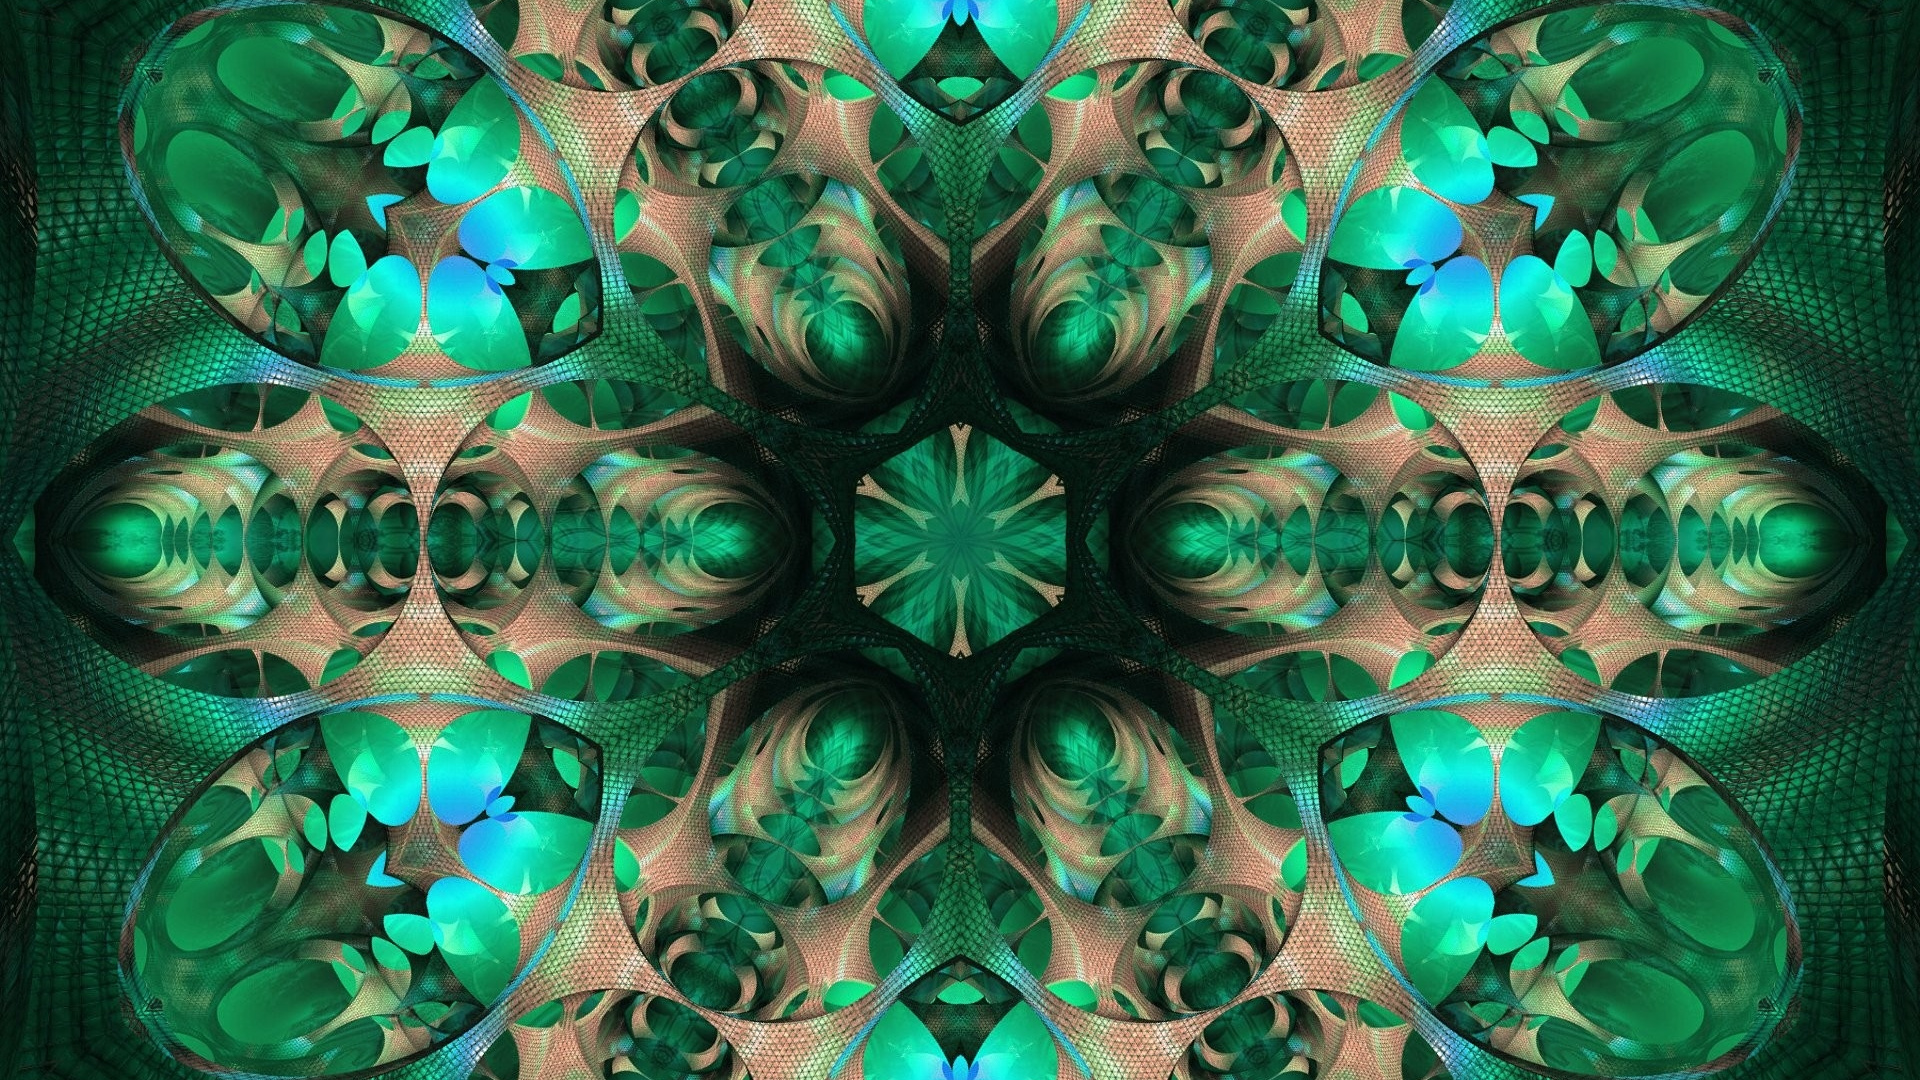 Green and Black Abstract Art. Wallpaper in 1920x1080 Resolution